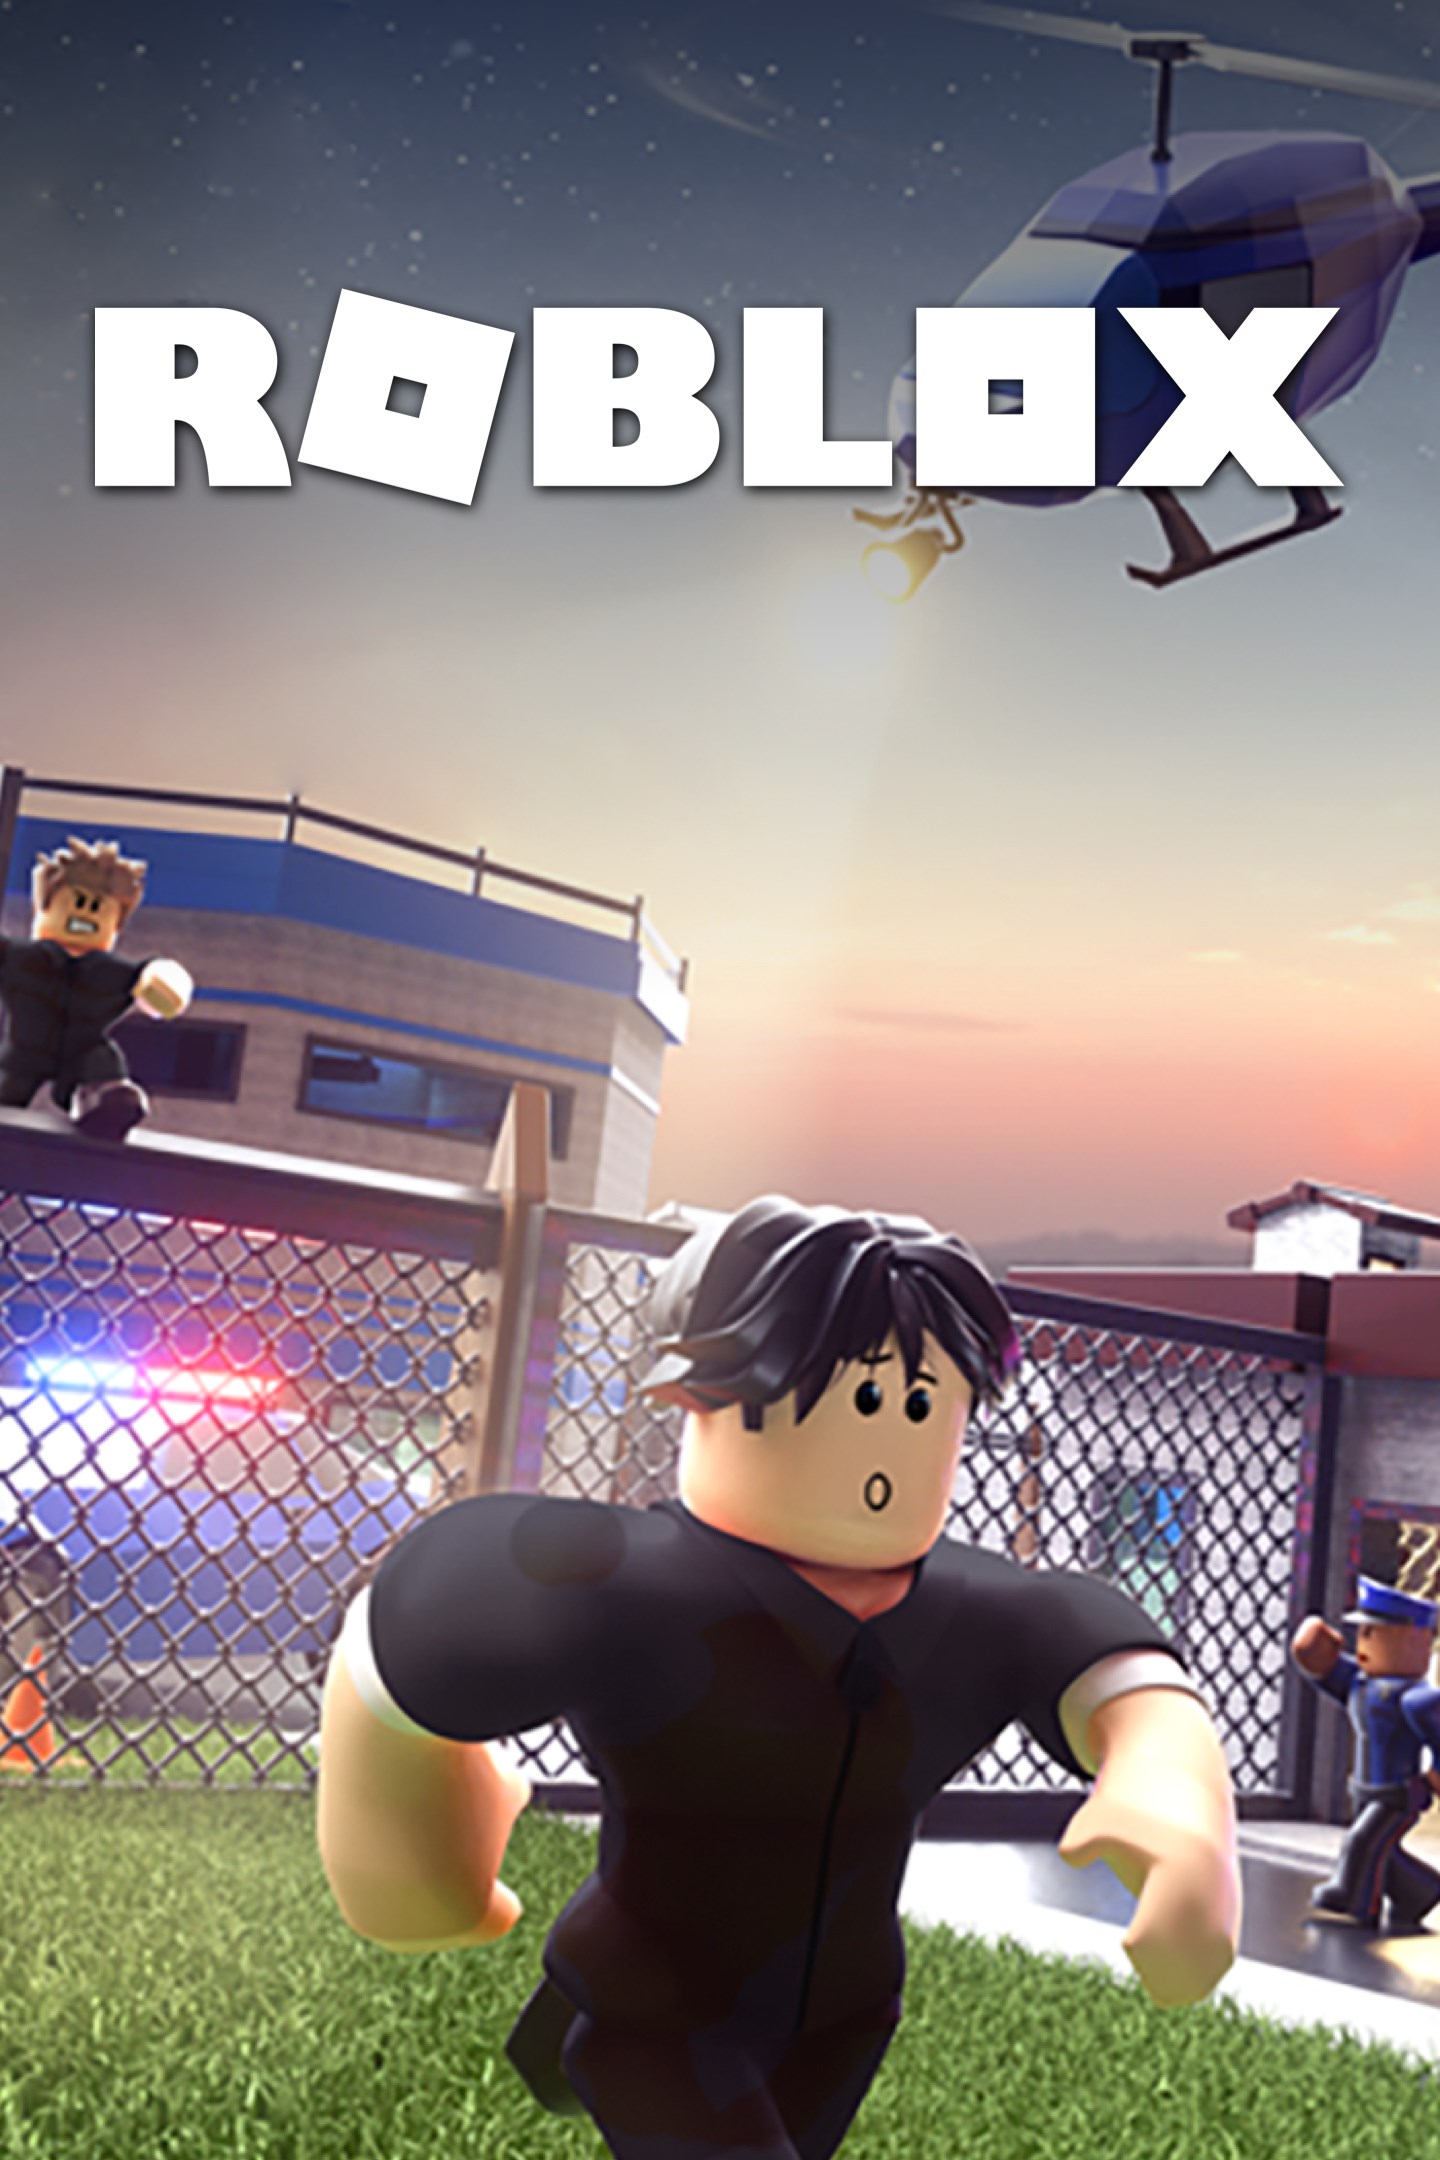 roblox free play without download